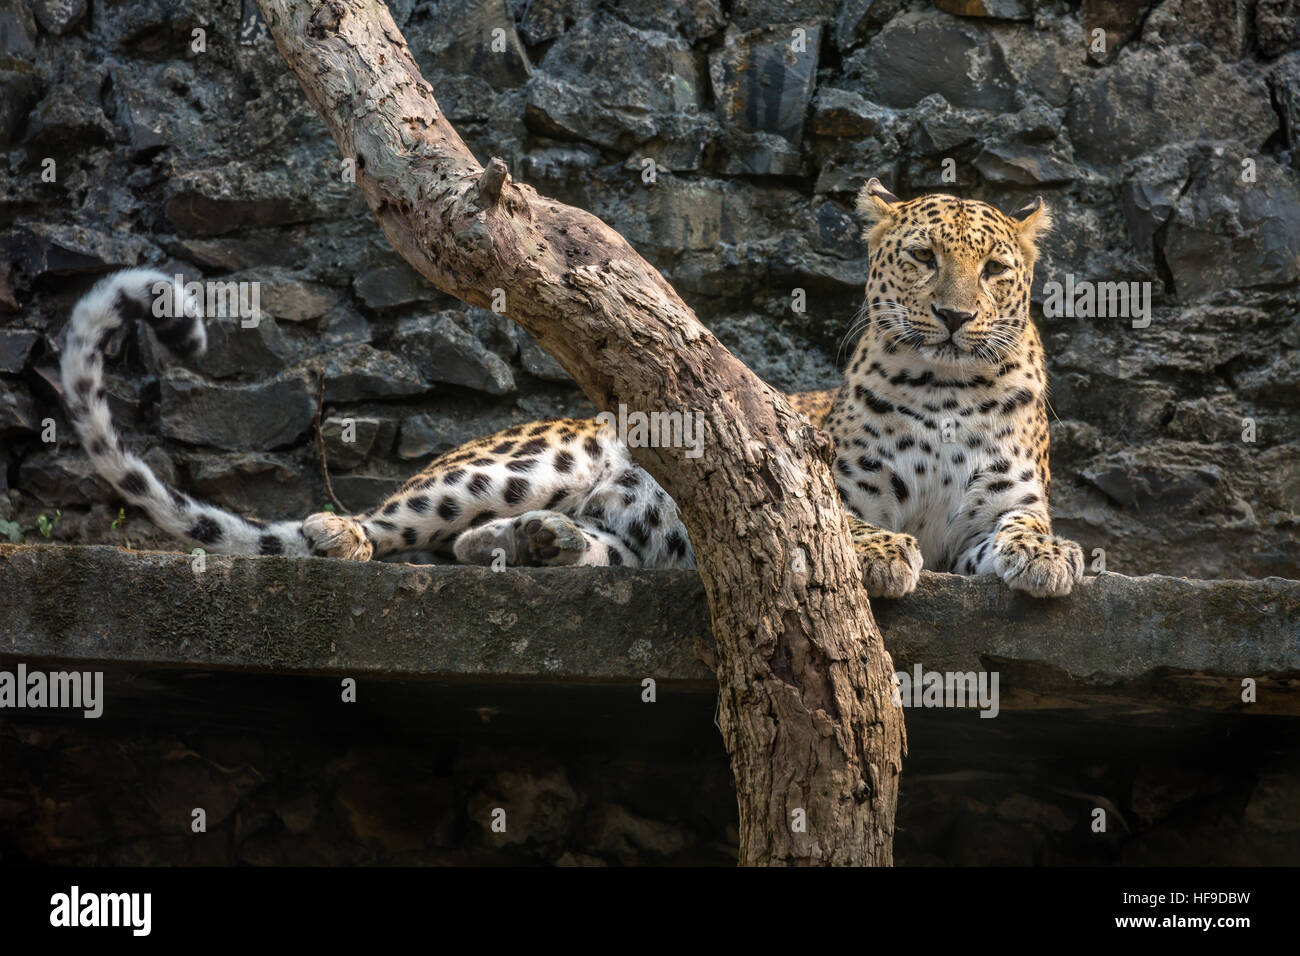 Male Indian leopard at an Indian zoo. Stock Photo